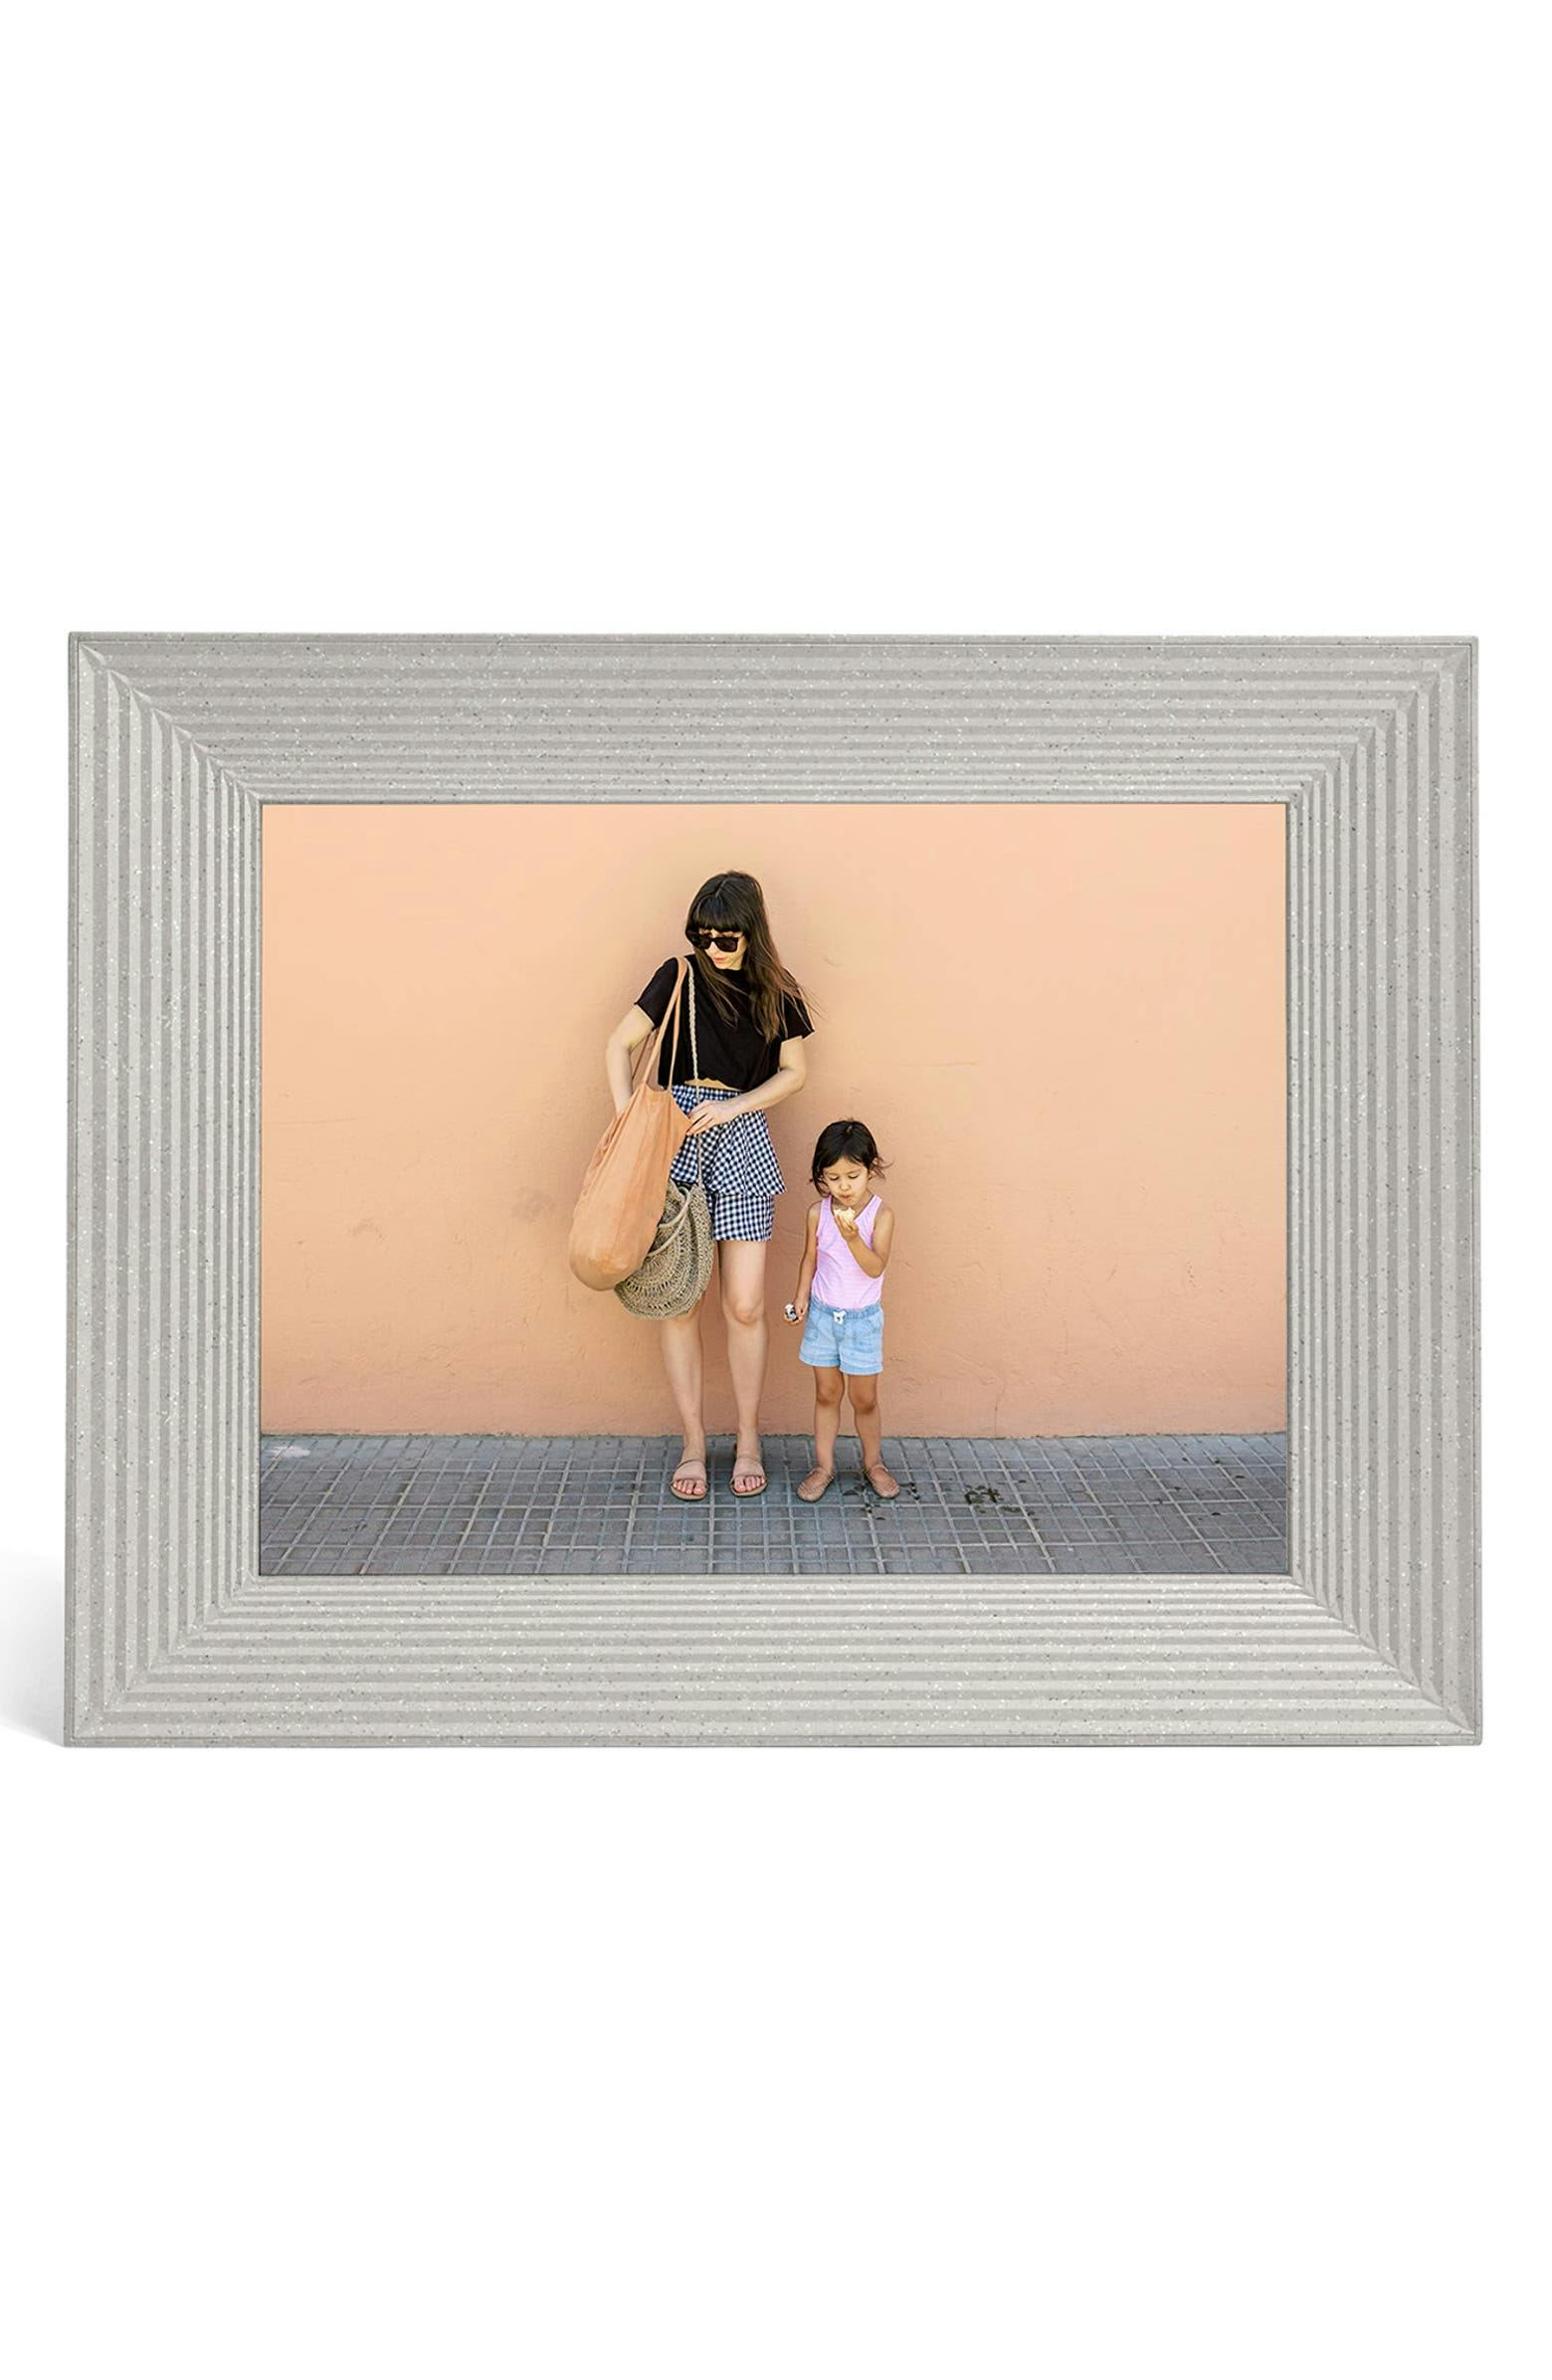 Digital photo frame best gifts for inlaws